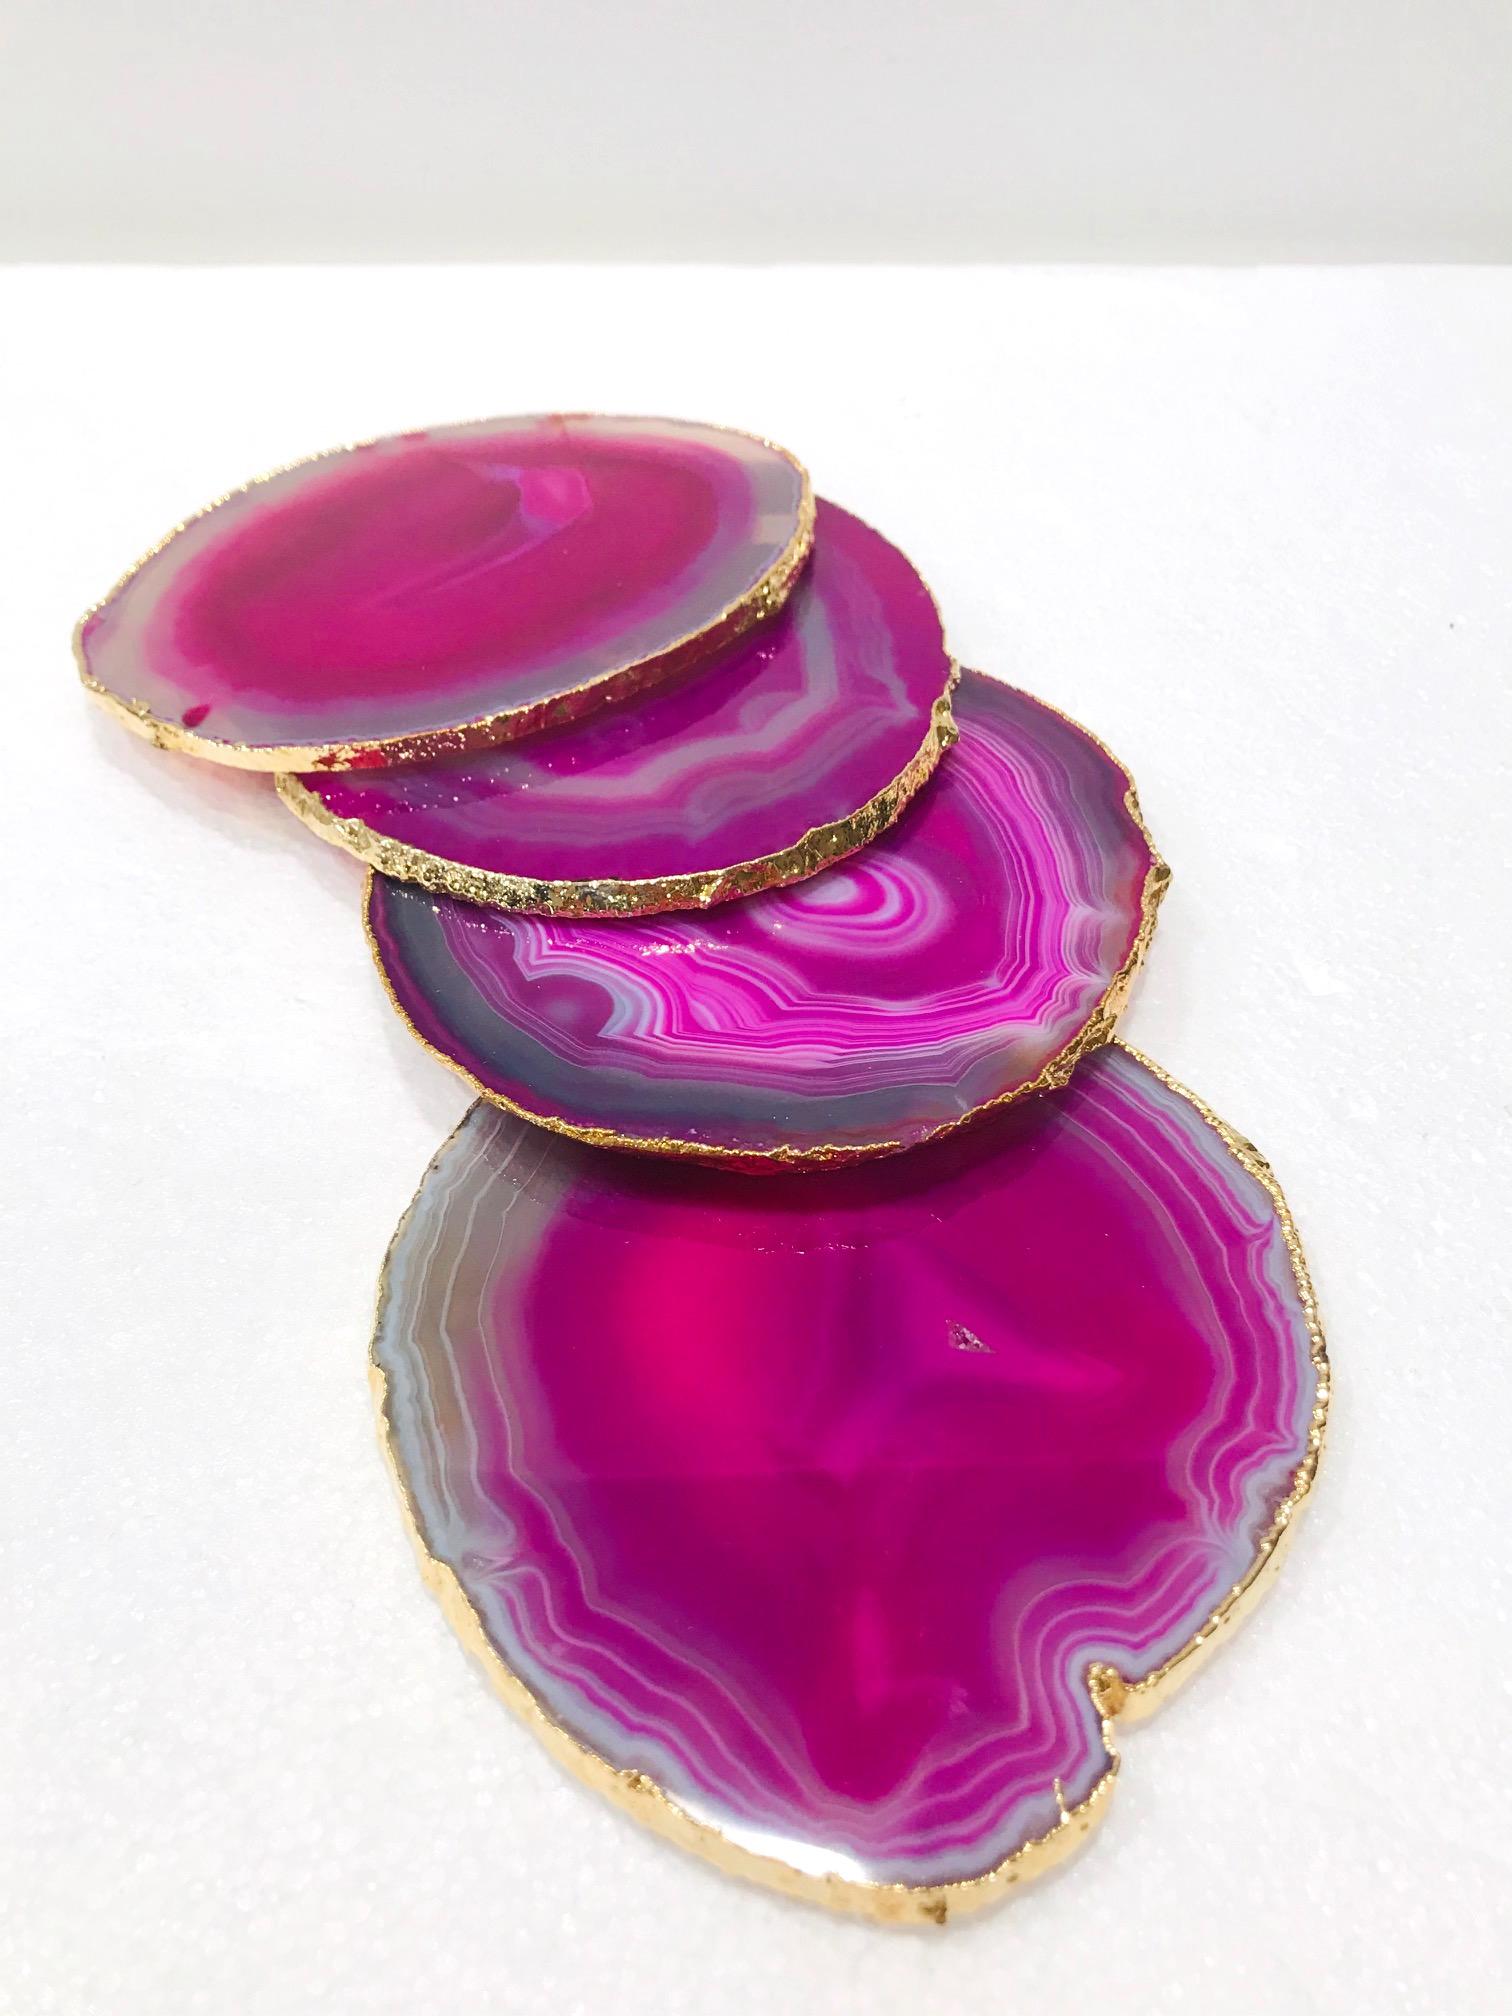 Brazilian Semi-Precious Gemstone Coasters in Pink and Turquoise with 24k Gold Trim, Set /8 For Sale